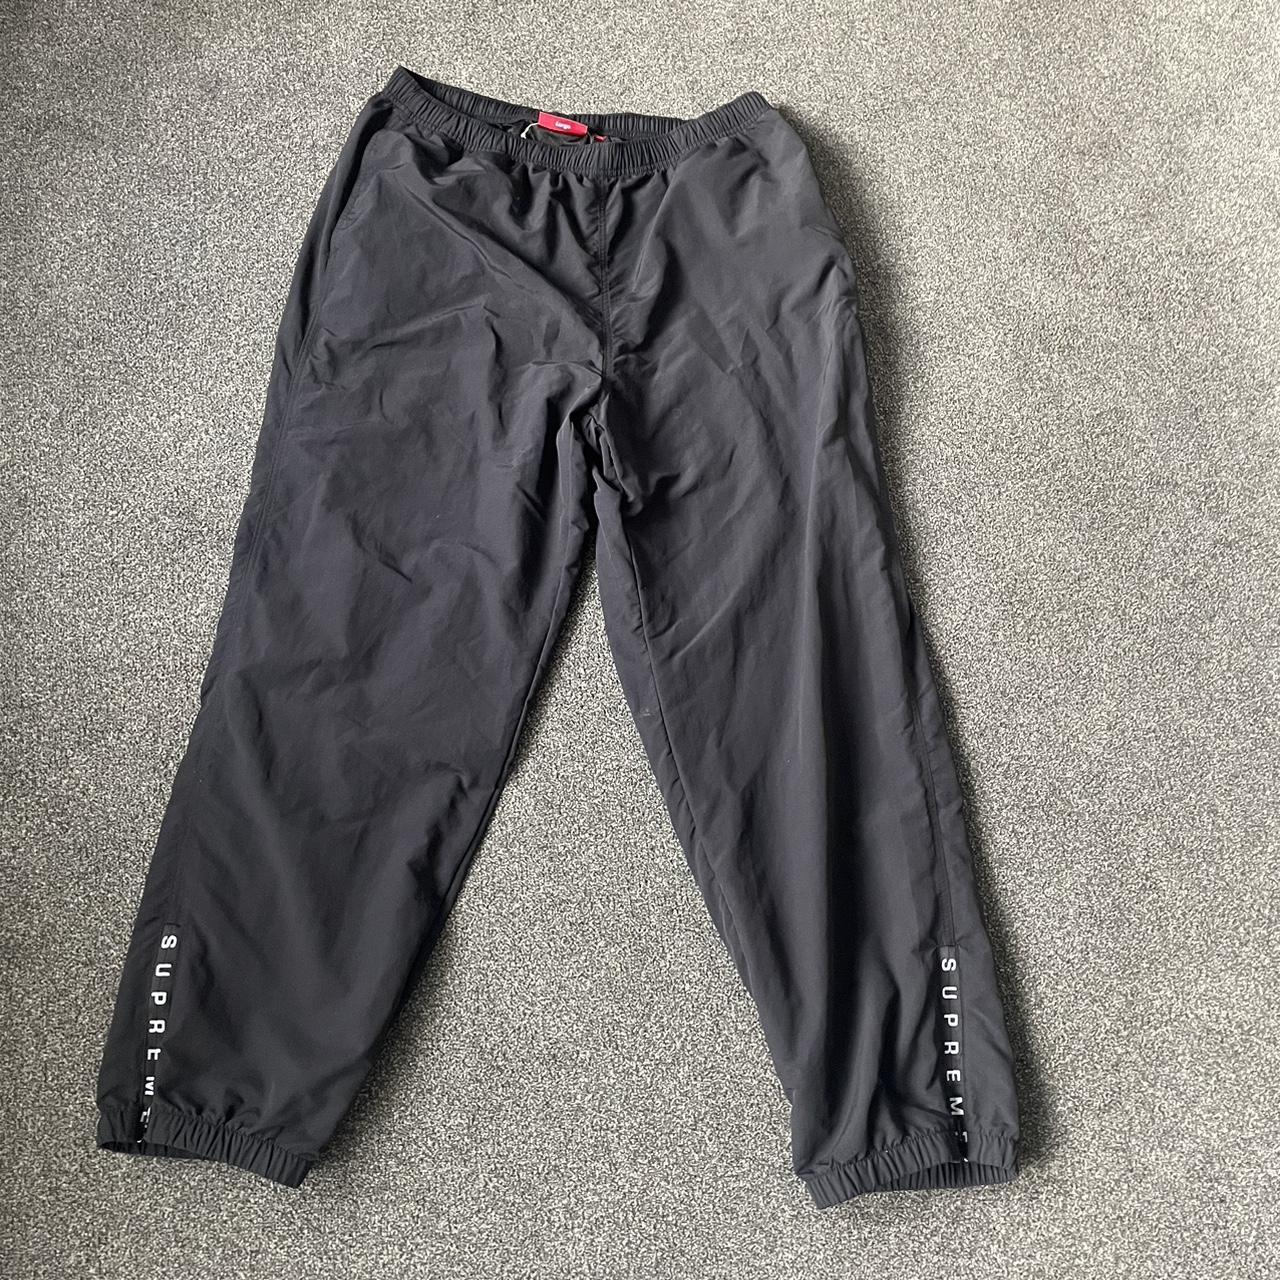 How do Supreme trousers fit? : r/Supreme